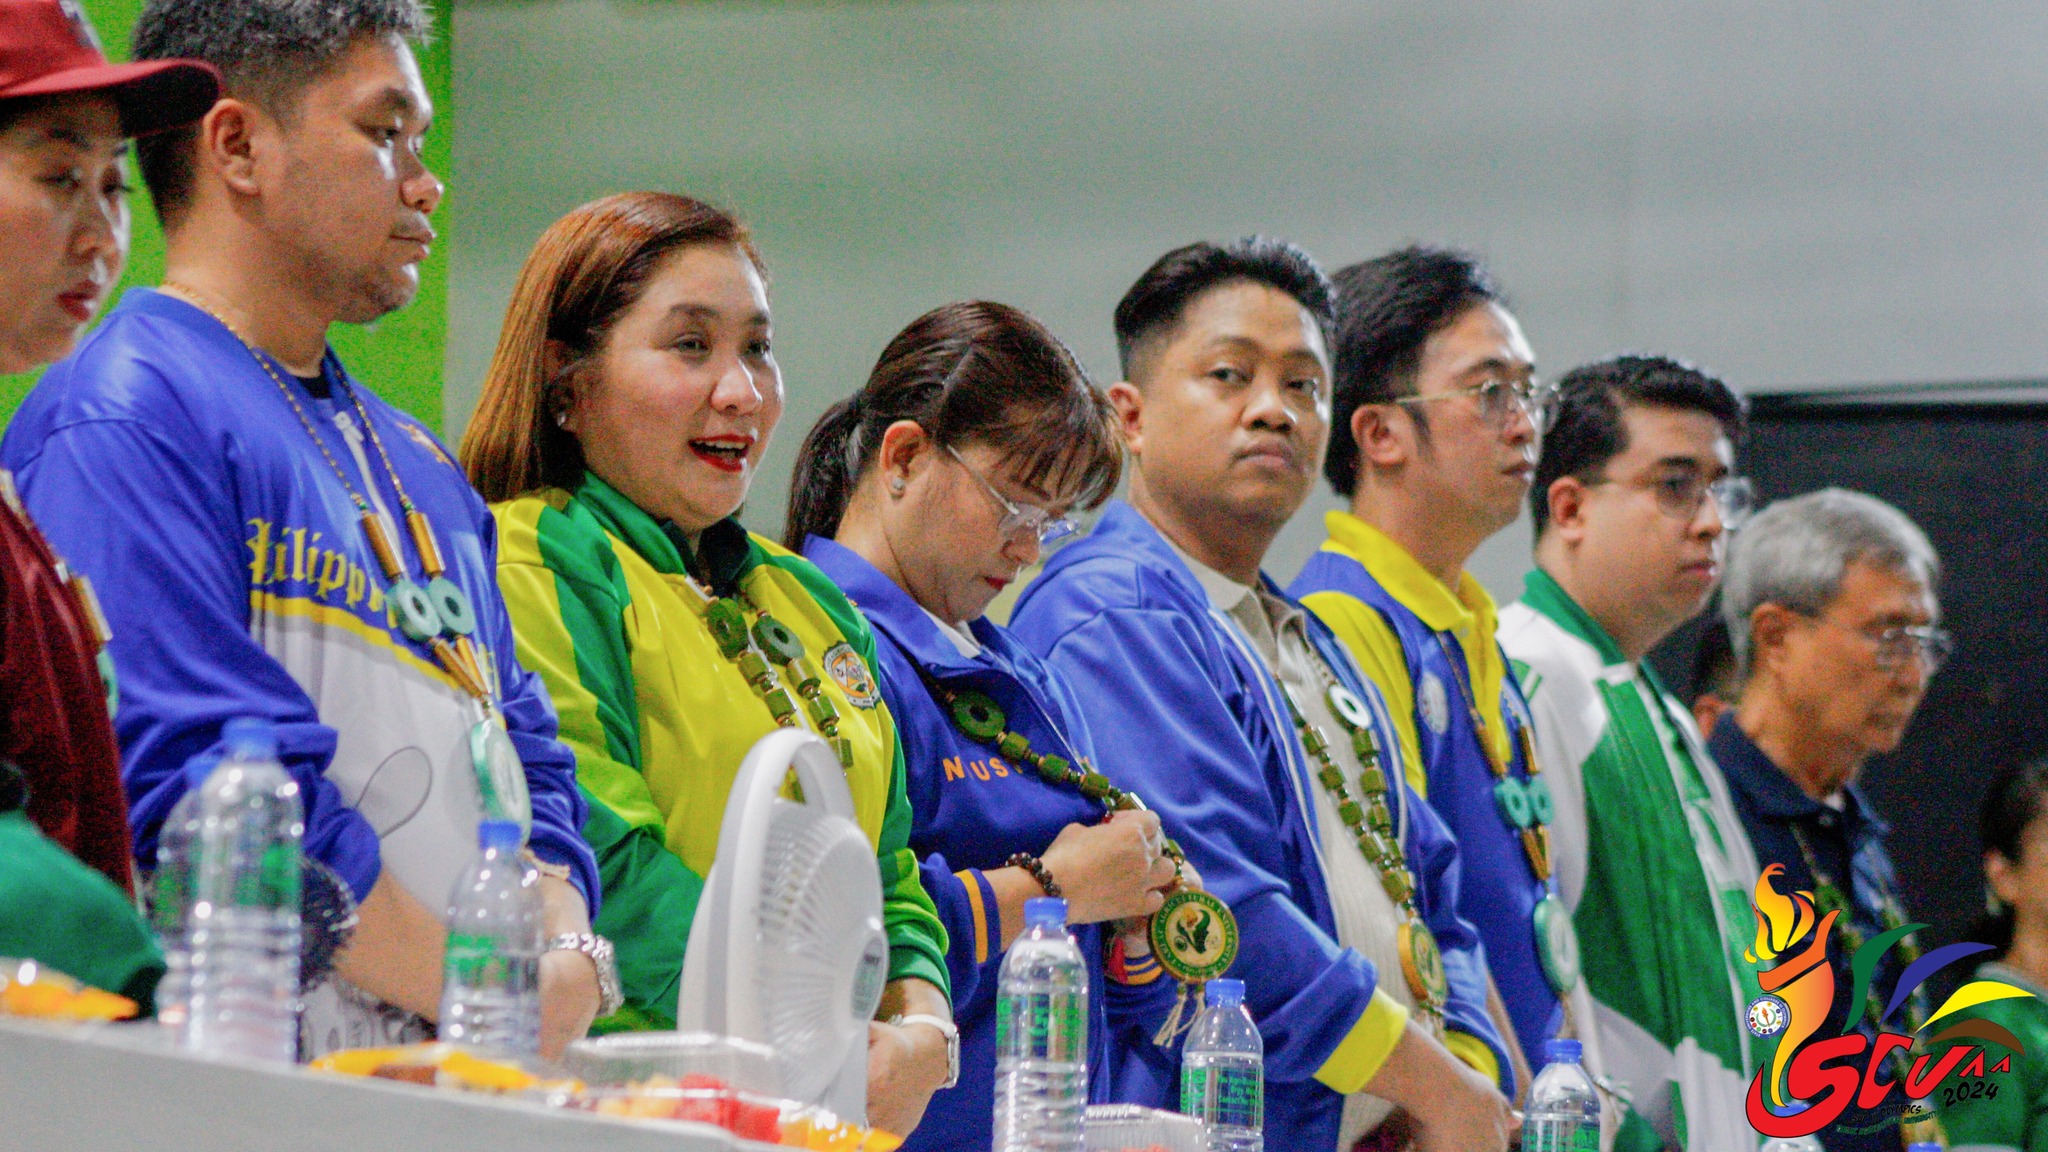 𝐂𝐀𝐏𝐓𝐔𝐑𝐄𝐃 𝐈𝐍 𝐋𝐄𝐍𝐒 | Despite the  inclement weather, athletes and their coaches are in high spirits during the opening ceremony of SUC III Olympics, 19 May. The opener is relocated to the G.O. Teodoro Multipurpose Center following the decision of the State Colleges and Universities Athletic Association (SCUAA) III to continue the program.